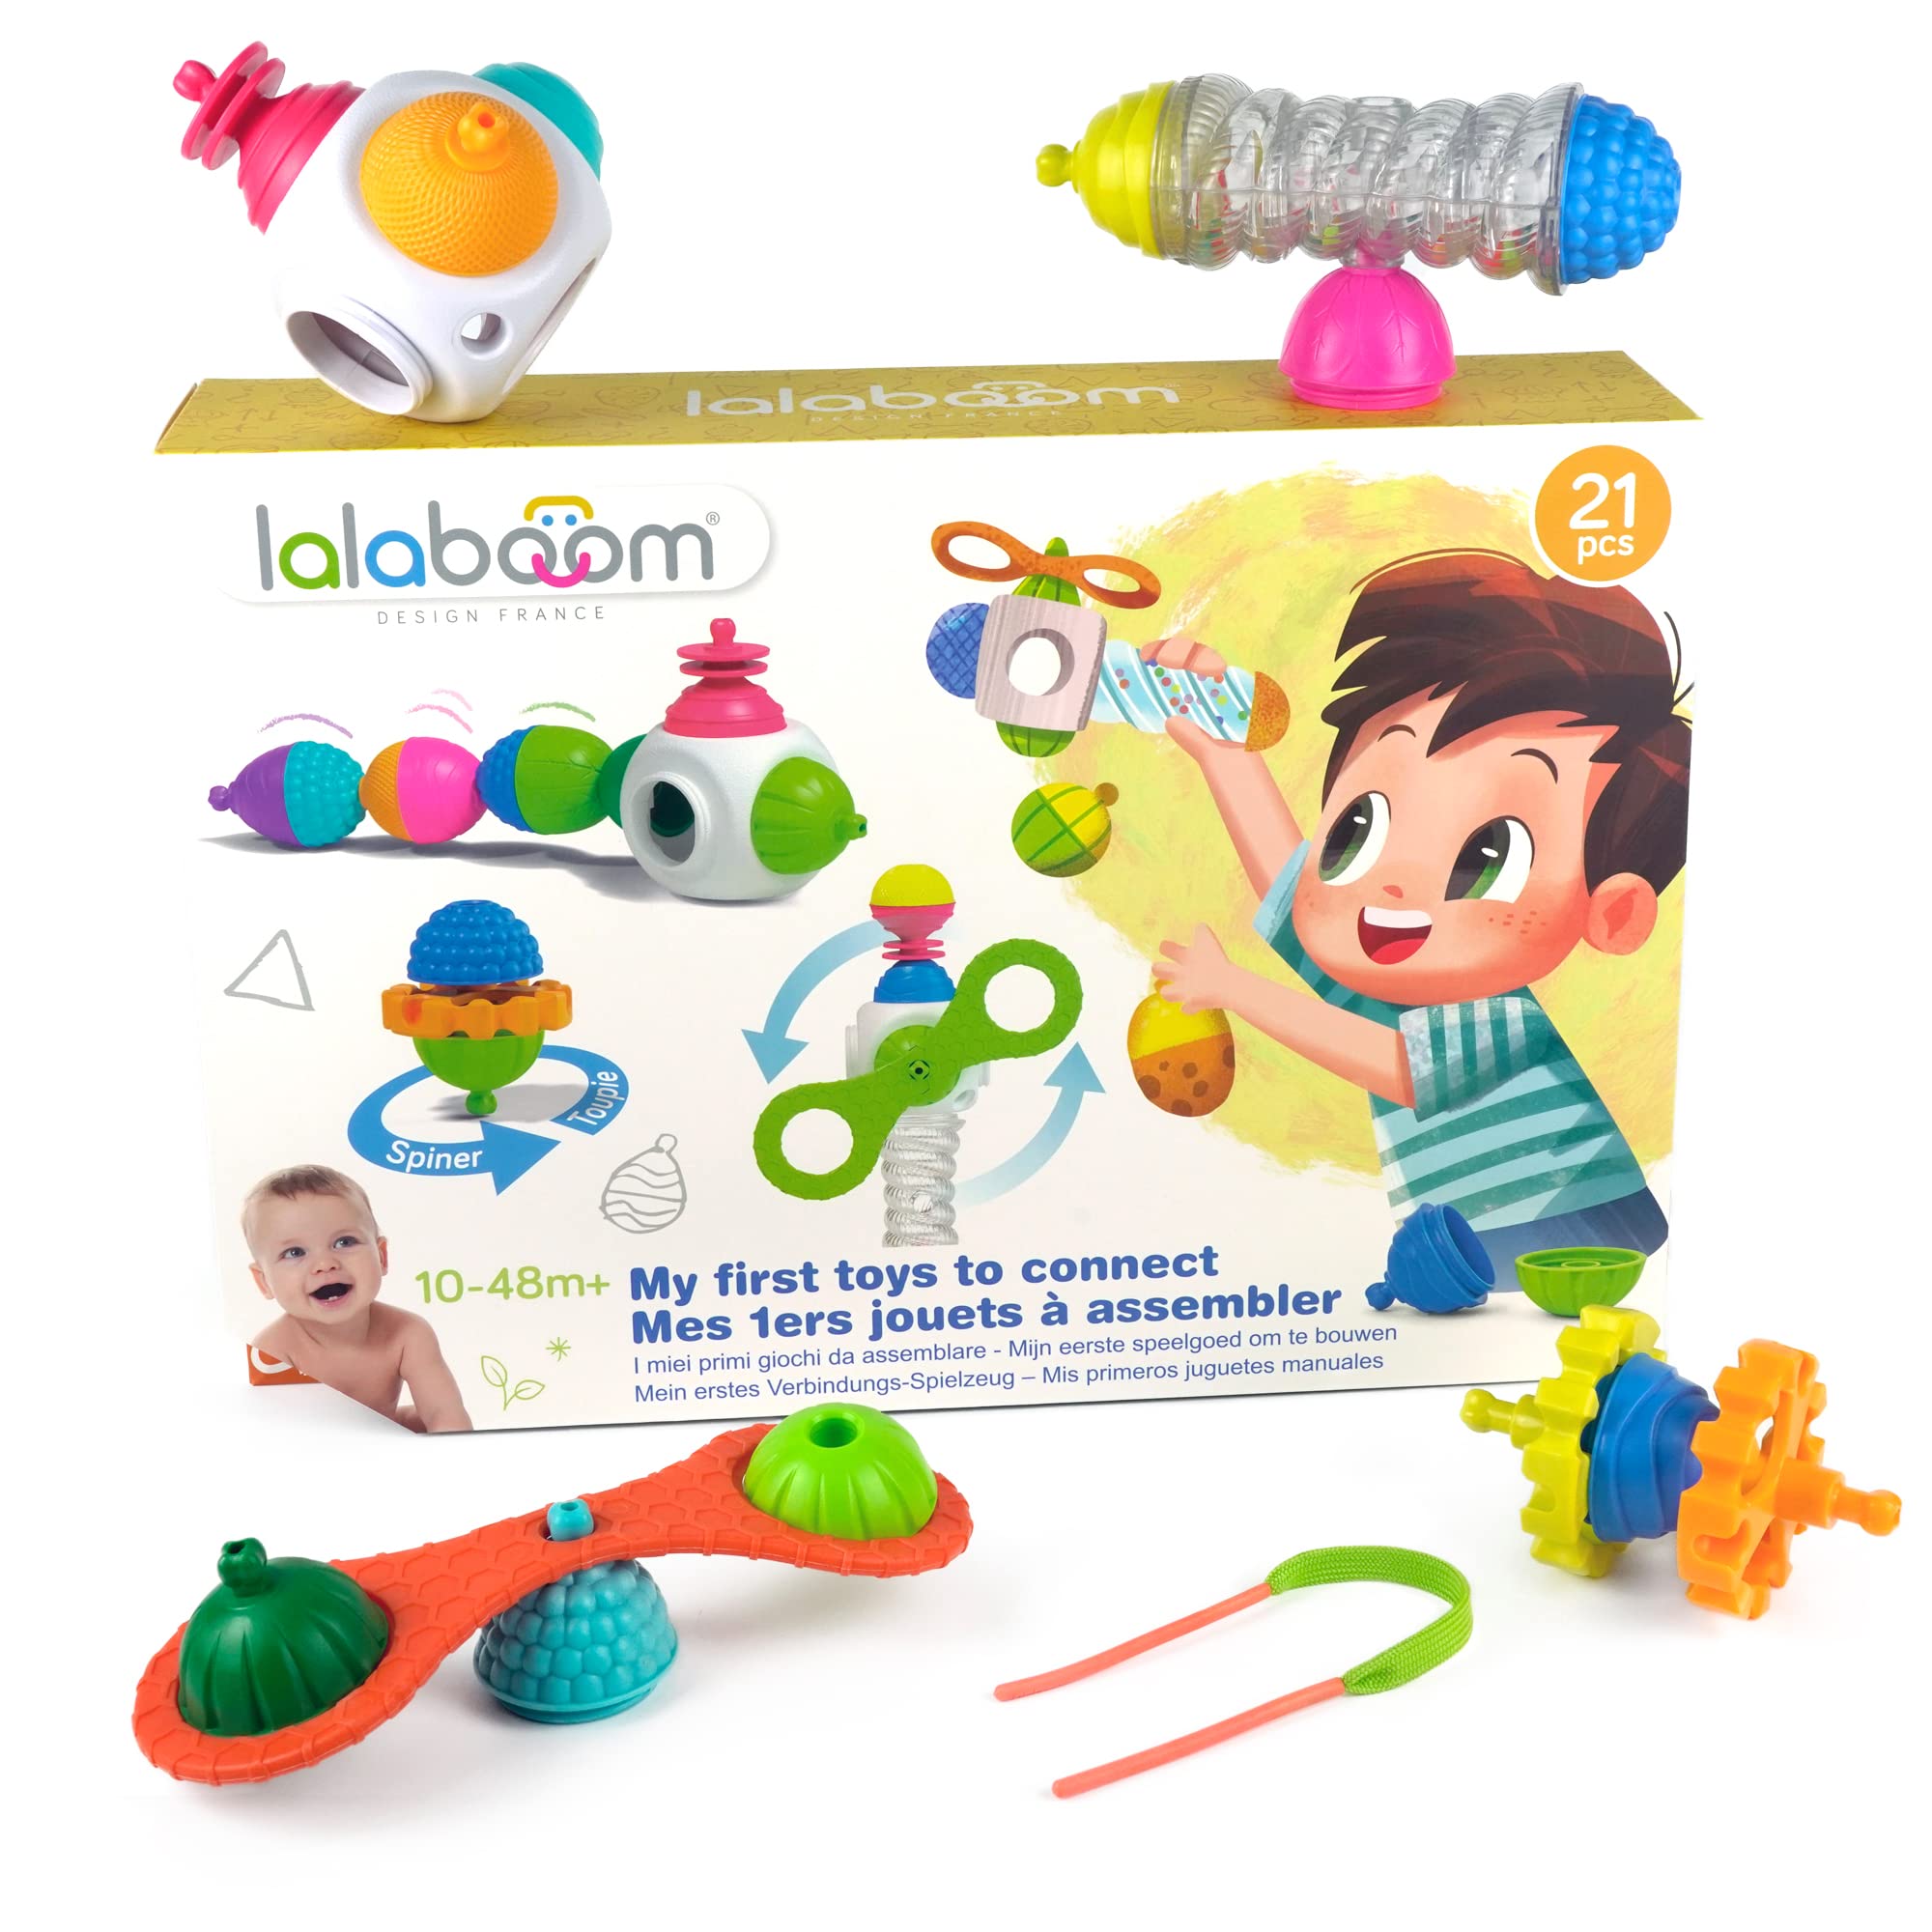 Lalaboom – Preschool Learning Toy - Construction Gift Set - Step by Step Toy - 6 Classic Toys and 7 Chunky Beads with Accessory - 21 Pieces - from 10 Months to 4 Years Old, BL600